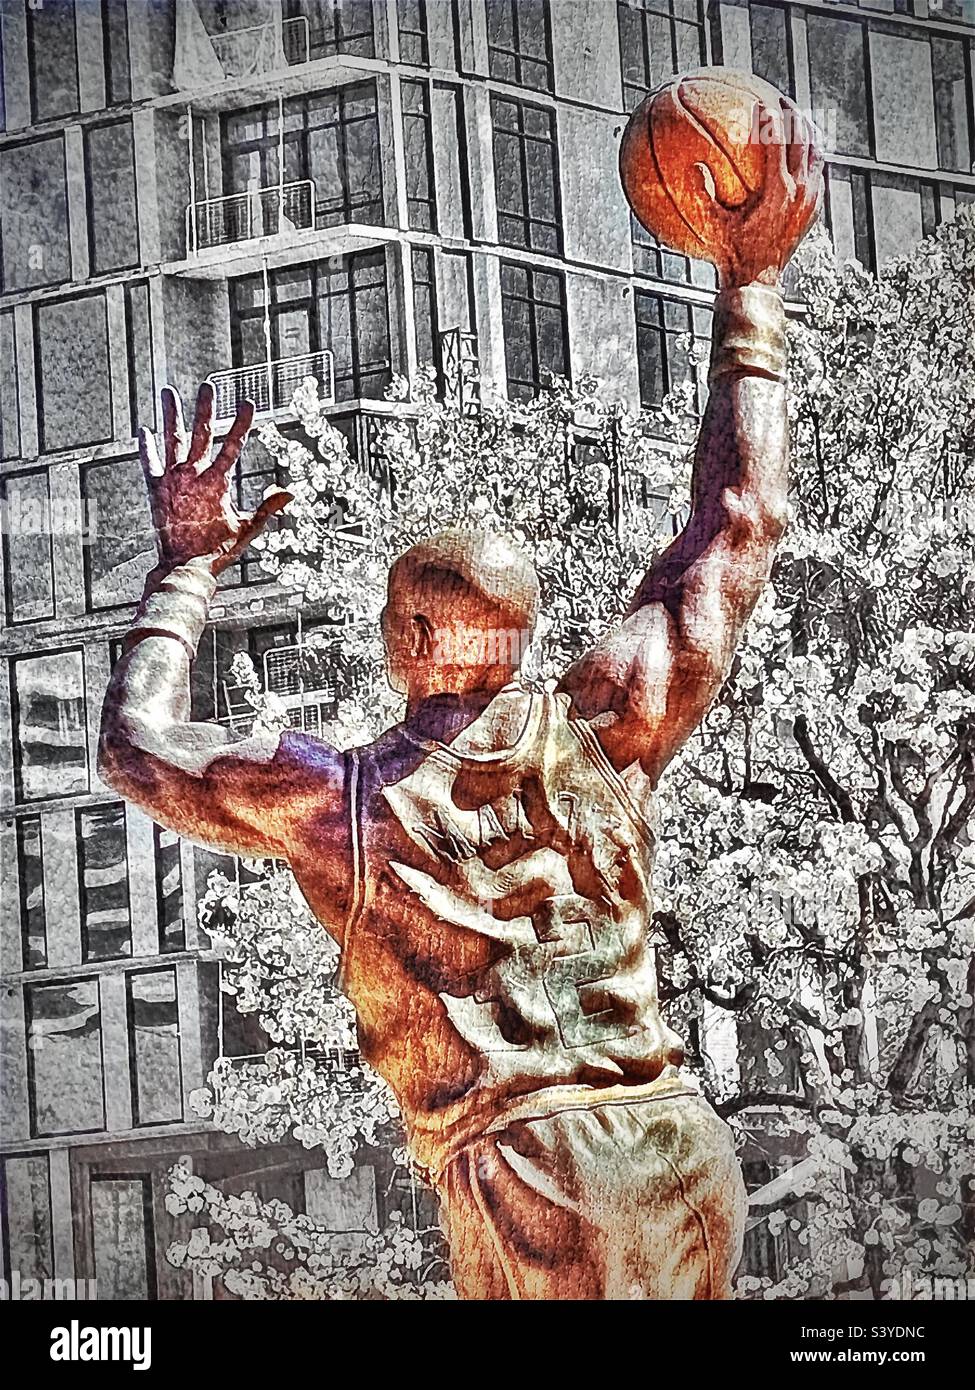 A view from the Vivint Arena, the home court of the NBA team the Utah Jazz, from behind the statue of Jazz great Karl Malone looking out toward the SLC downtown streets. Stock Photo